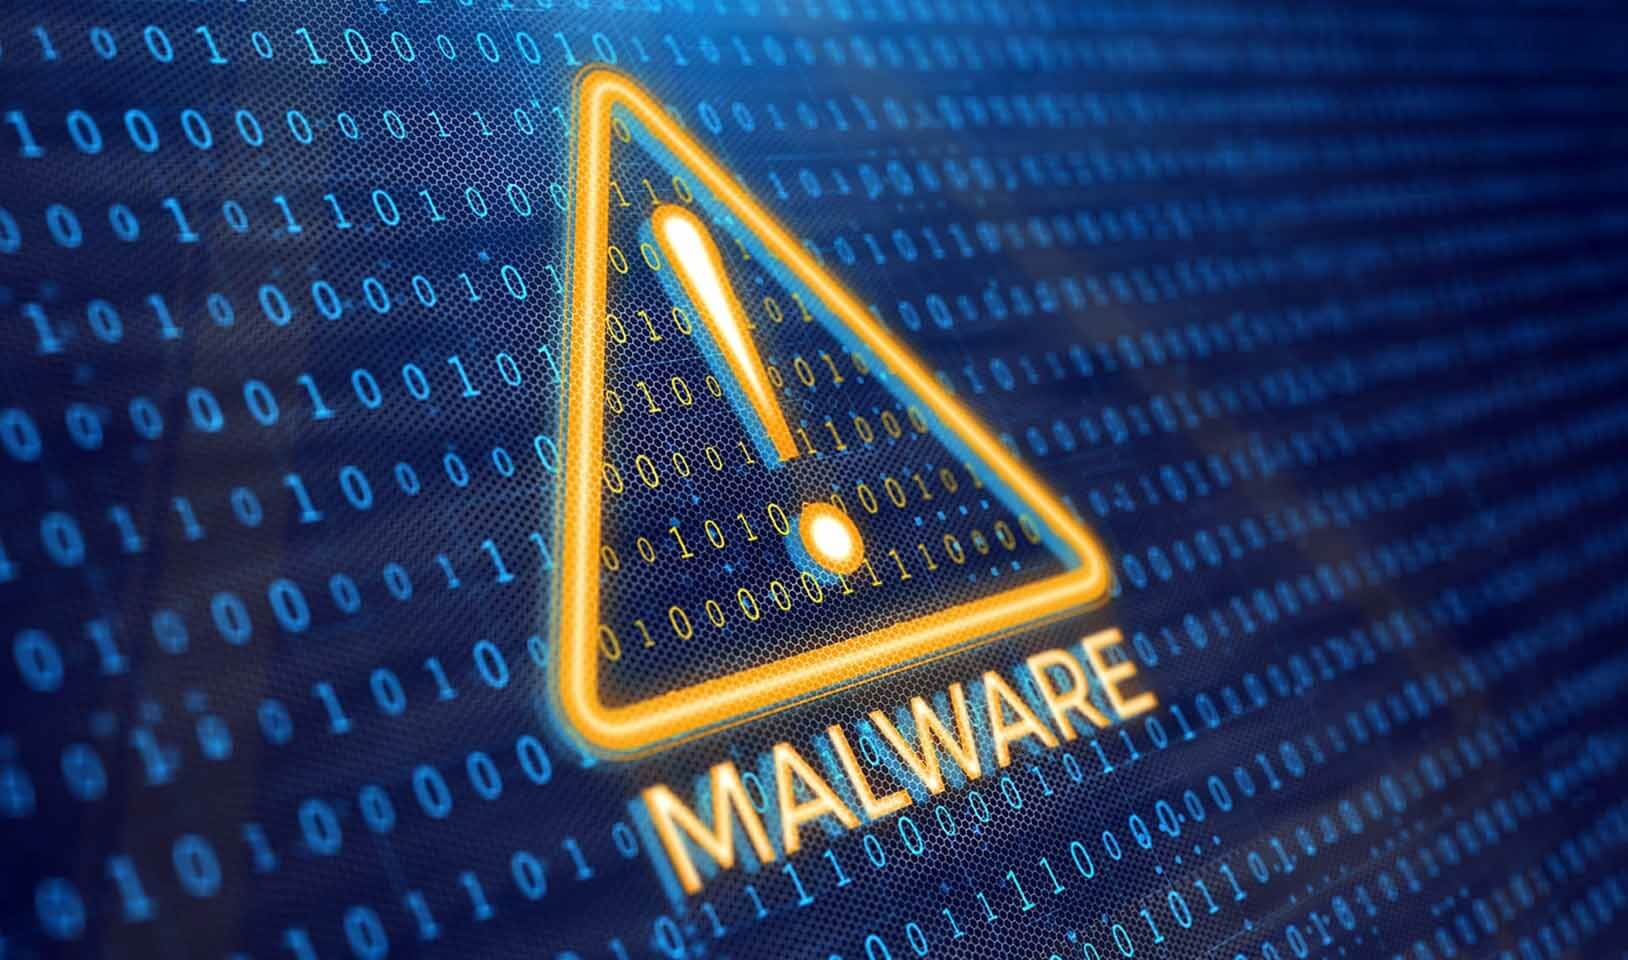 How these computer malwares (WannaCry, Petya) can bring the entire world to its knees